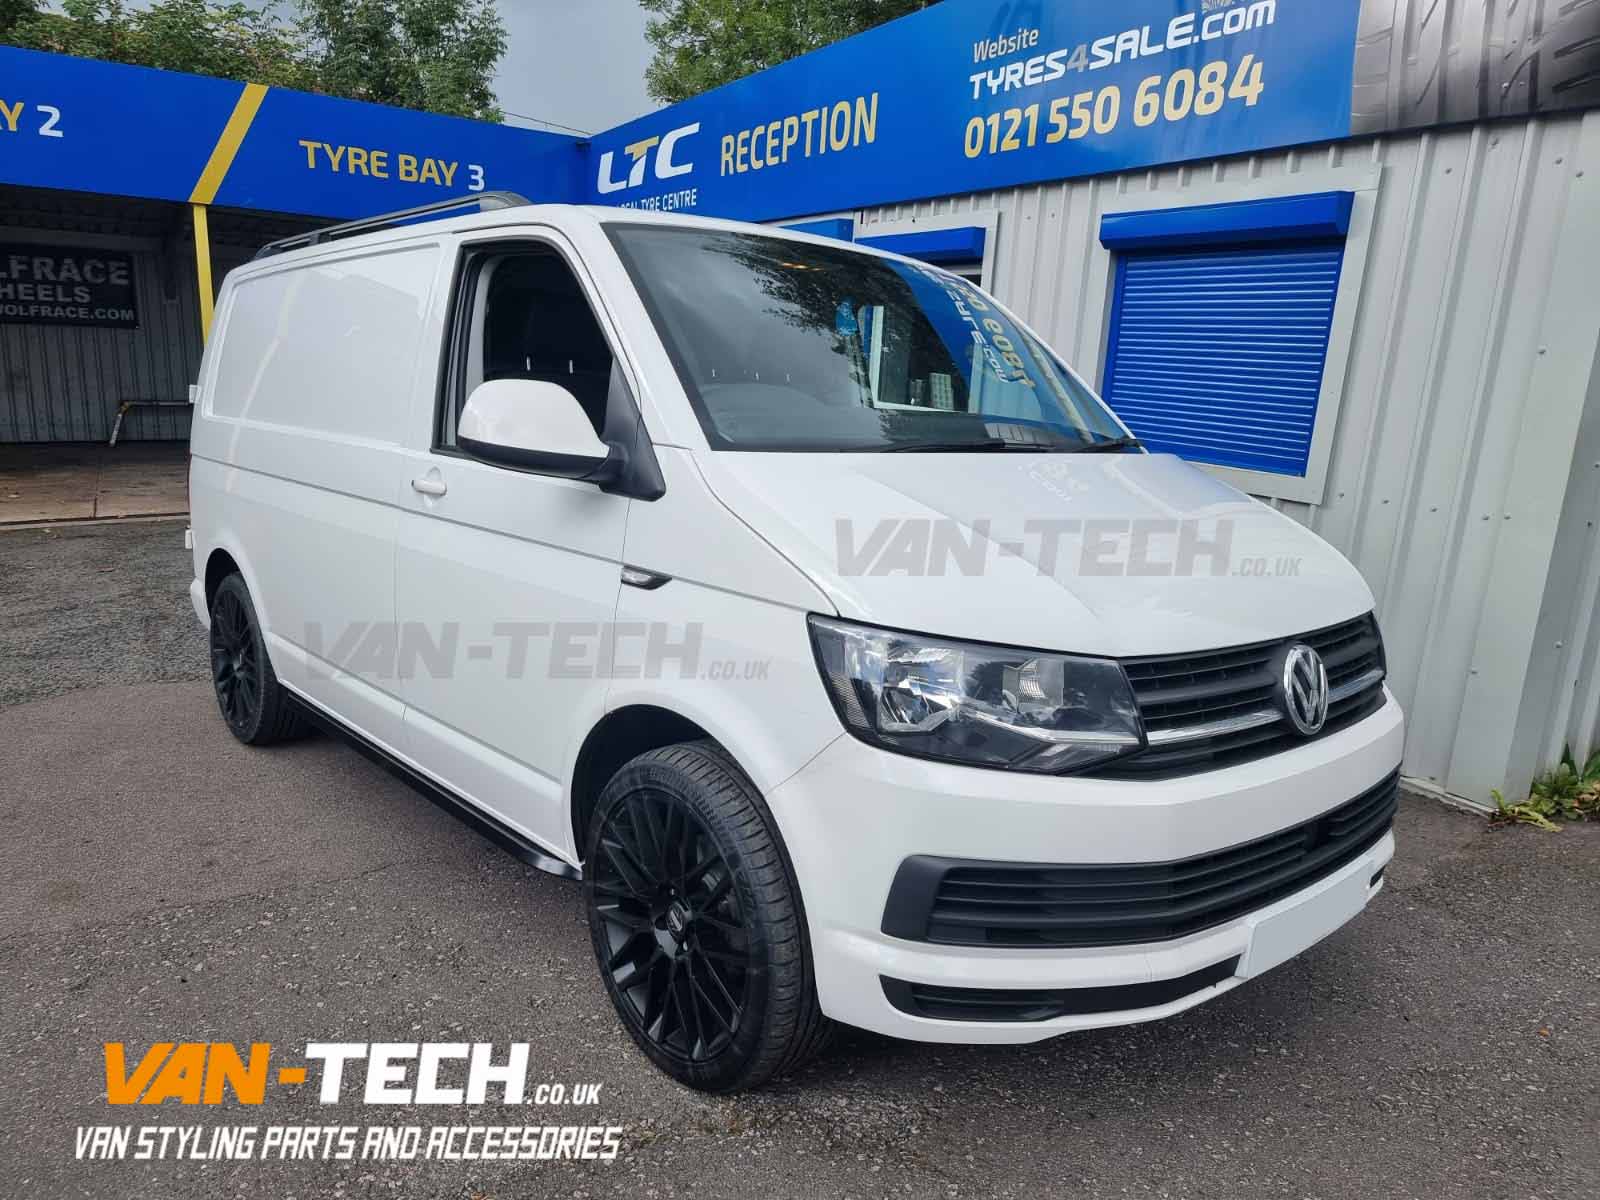 VW Transporter T6 Parts and Accessories Side Bars, Alloy Wheels and Roof Rails